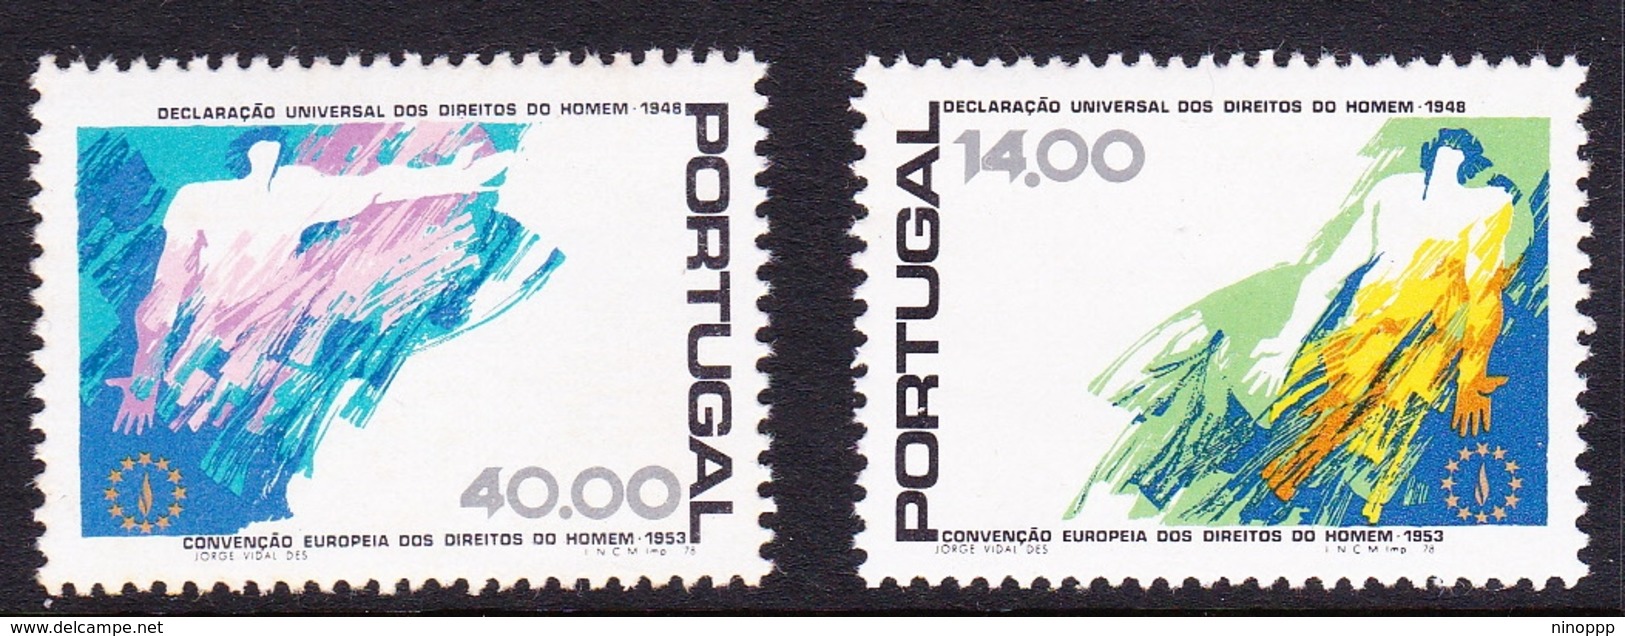 Portugal SG 1733-1734 1978 30th Anniversary Declaration Human Rights, Mint Never Hinged - Unused Stamps